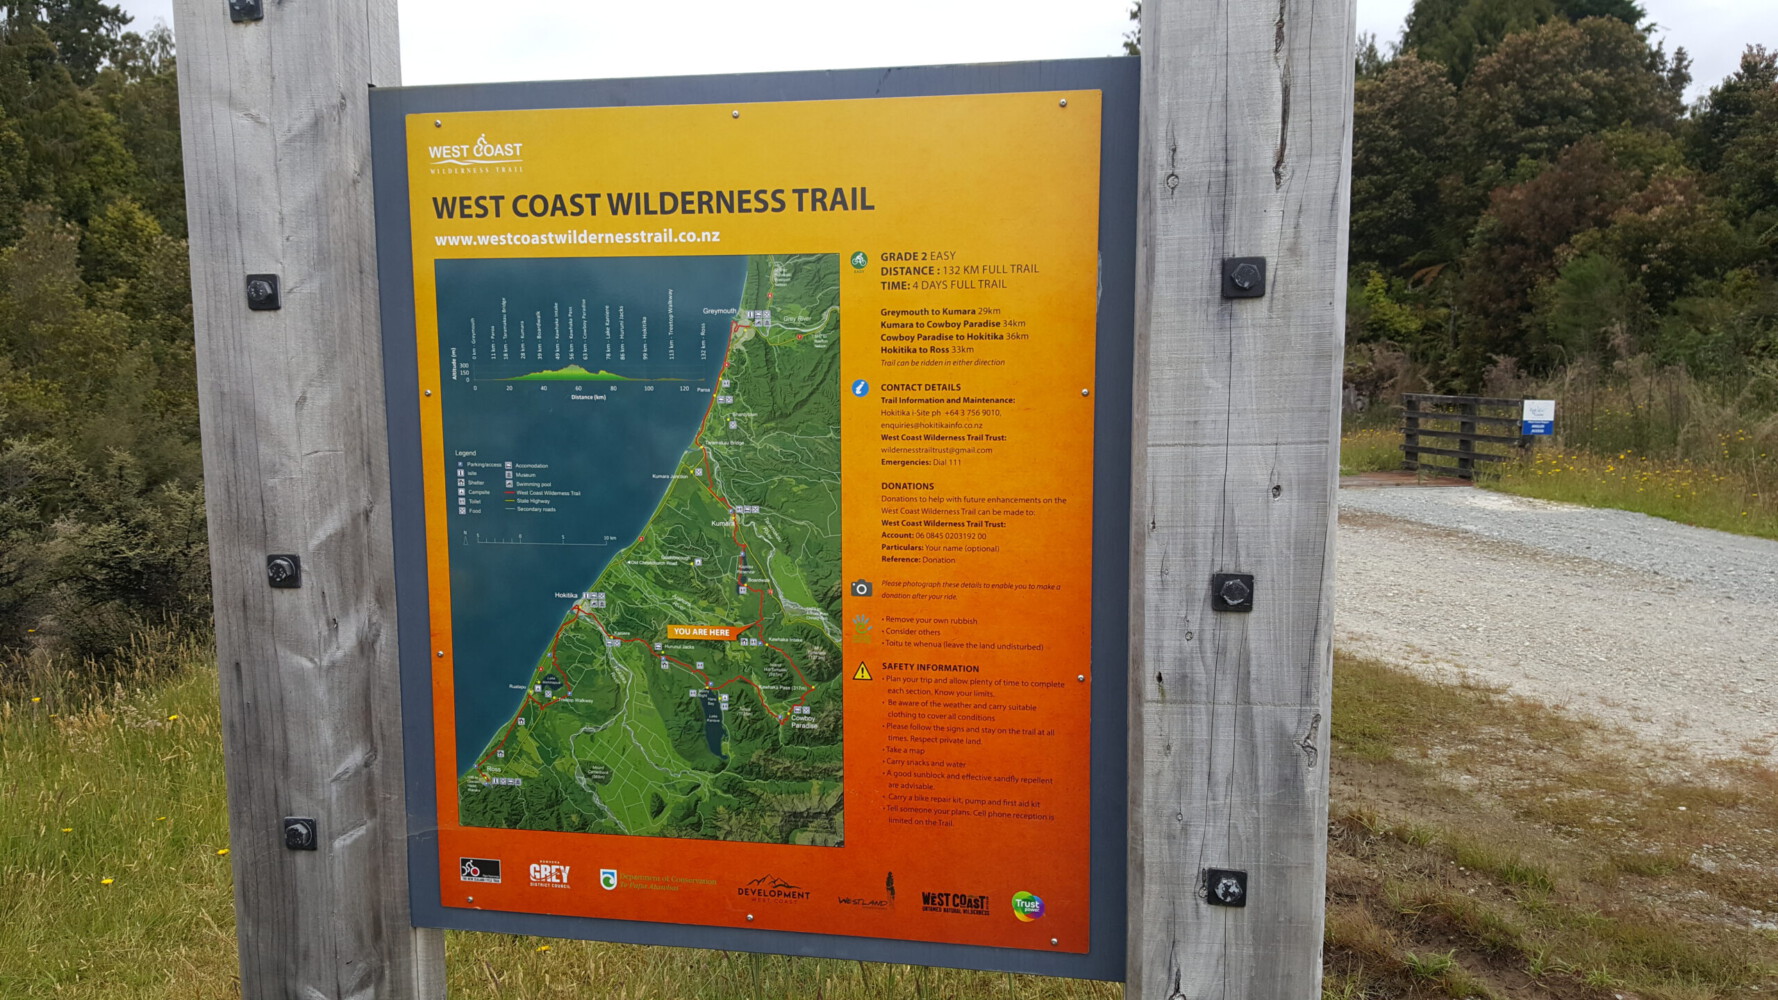 Sign of the West Coast Wilderness Trail